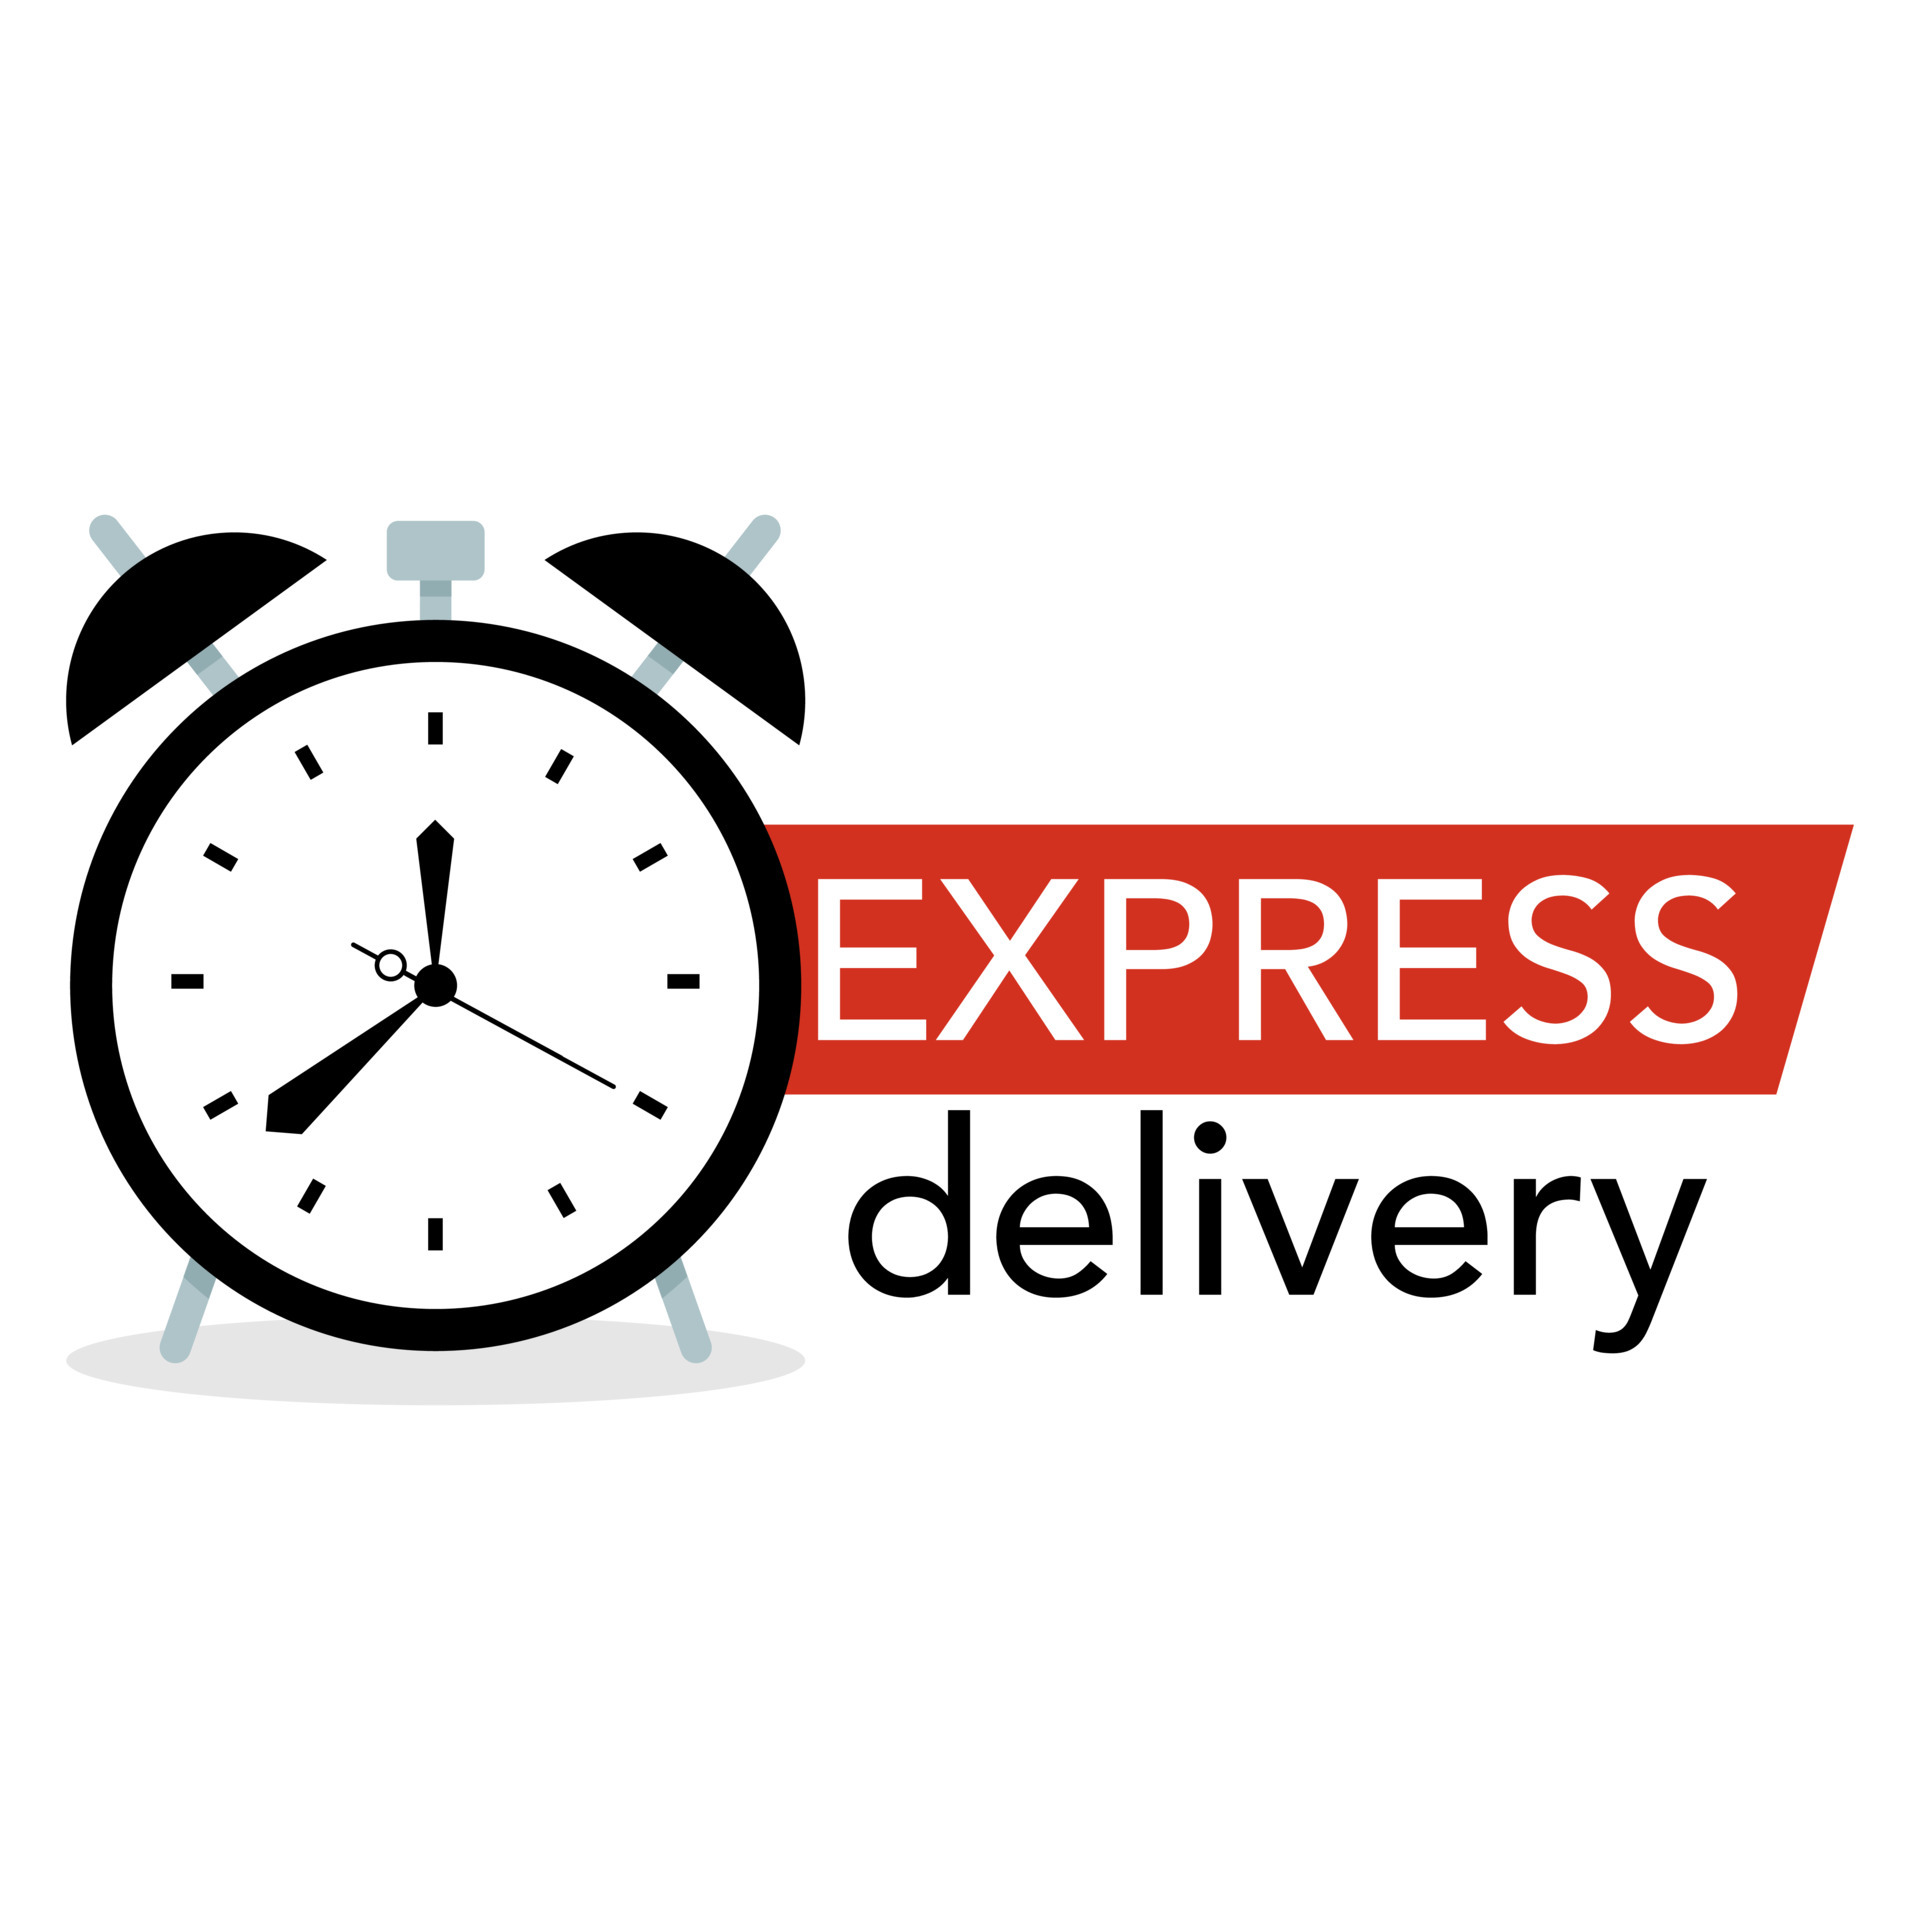 Express delivery logo. Clock icon with express delivery